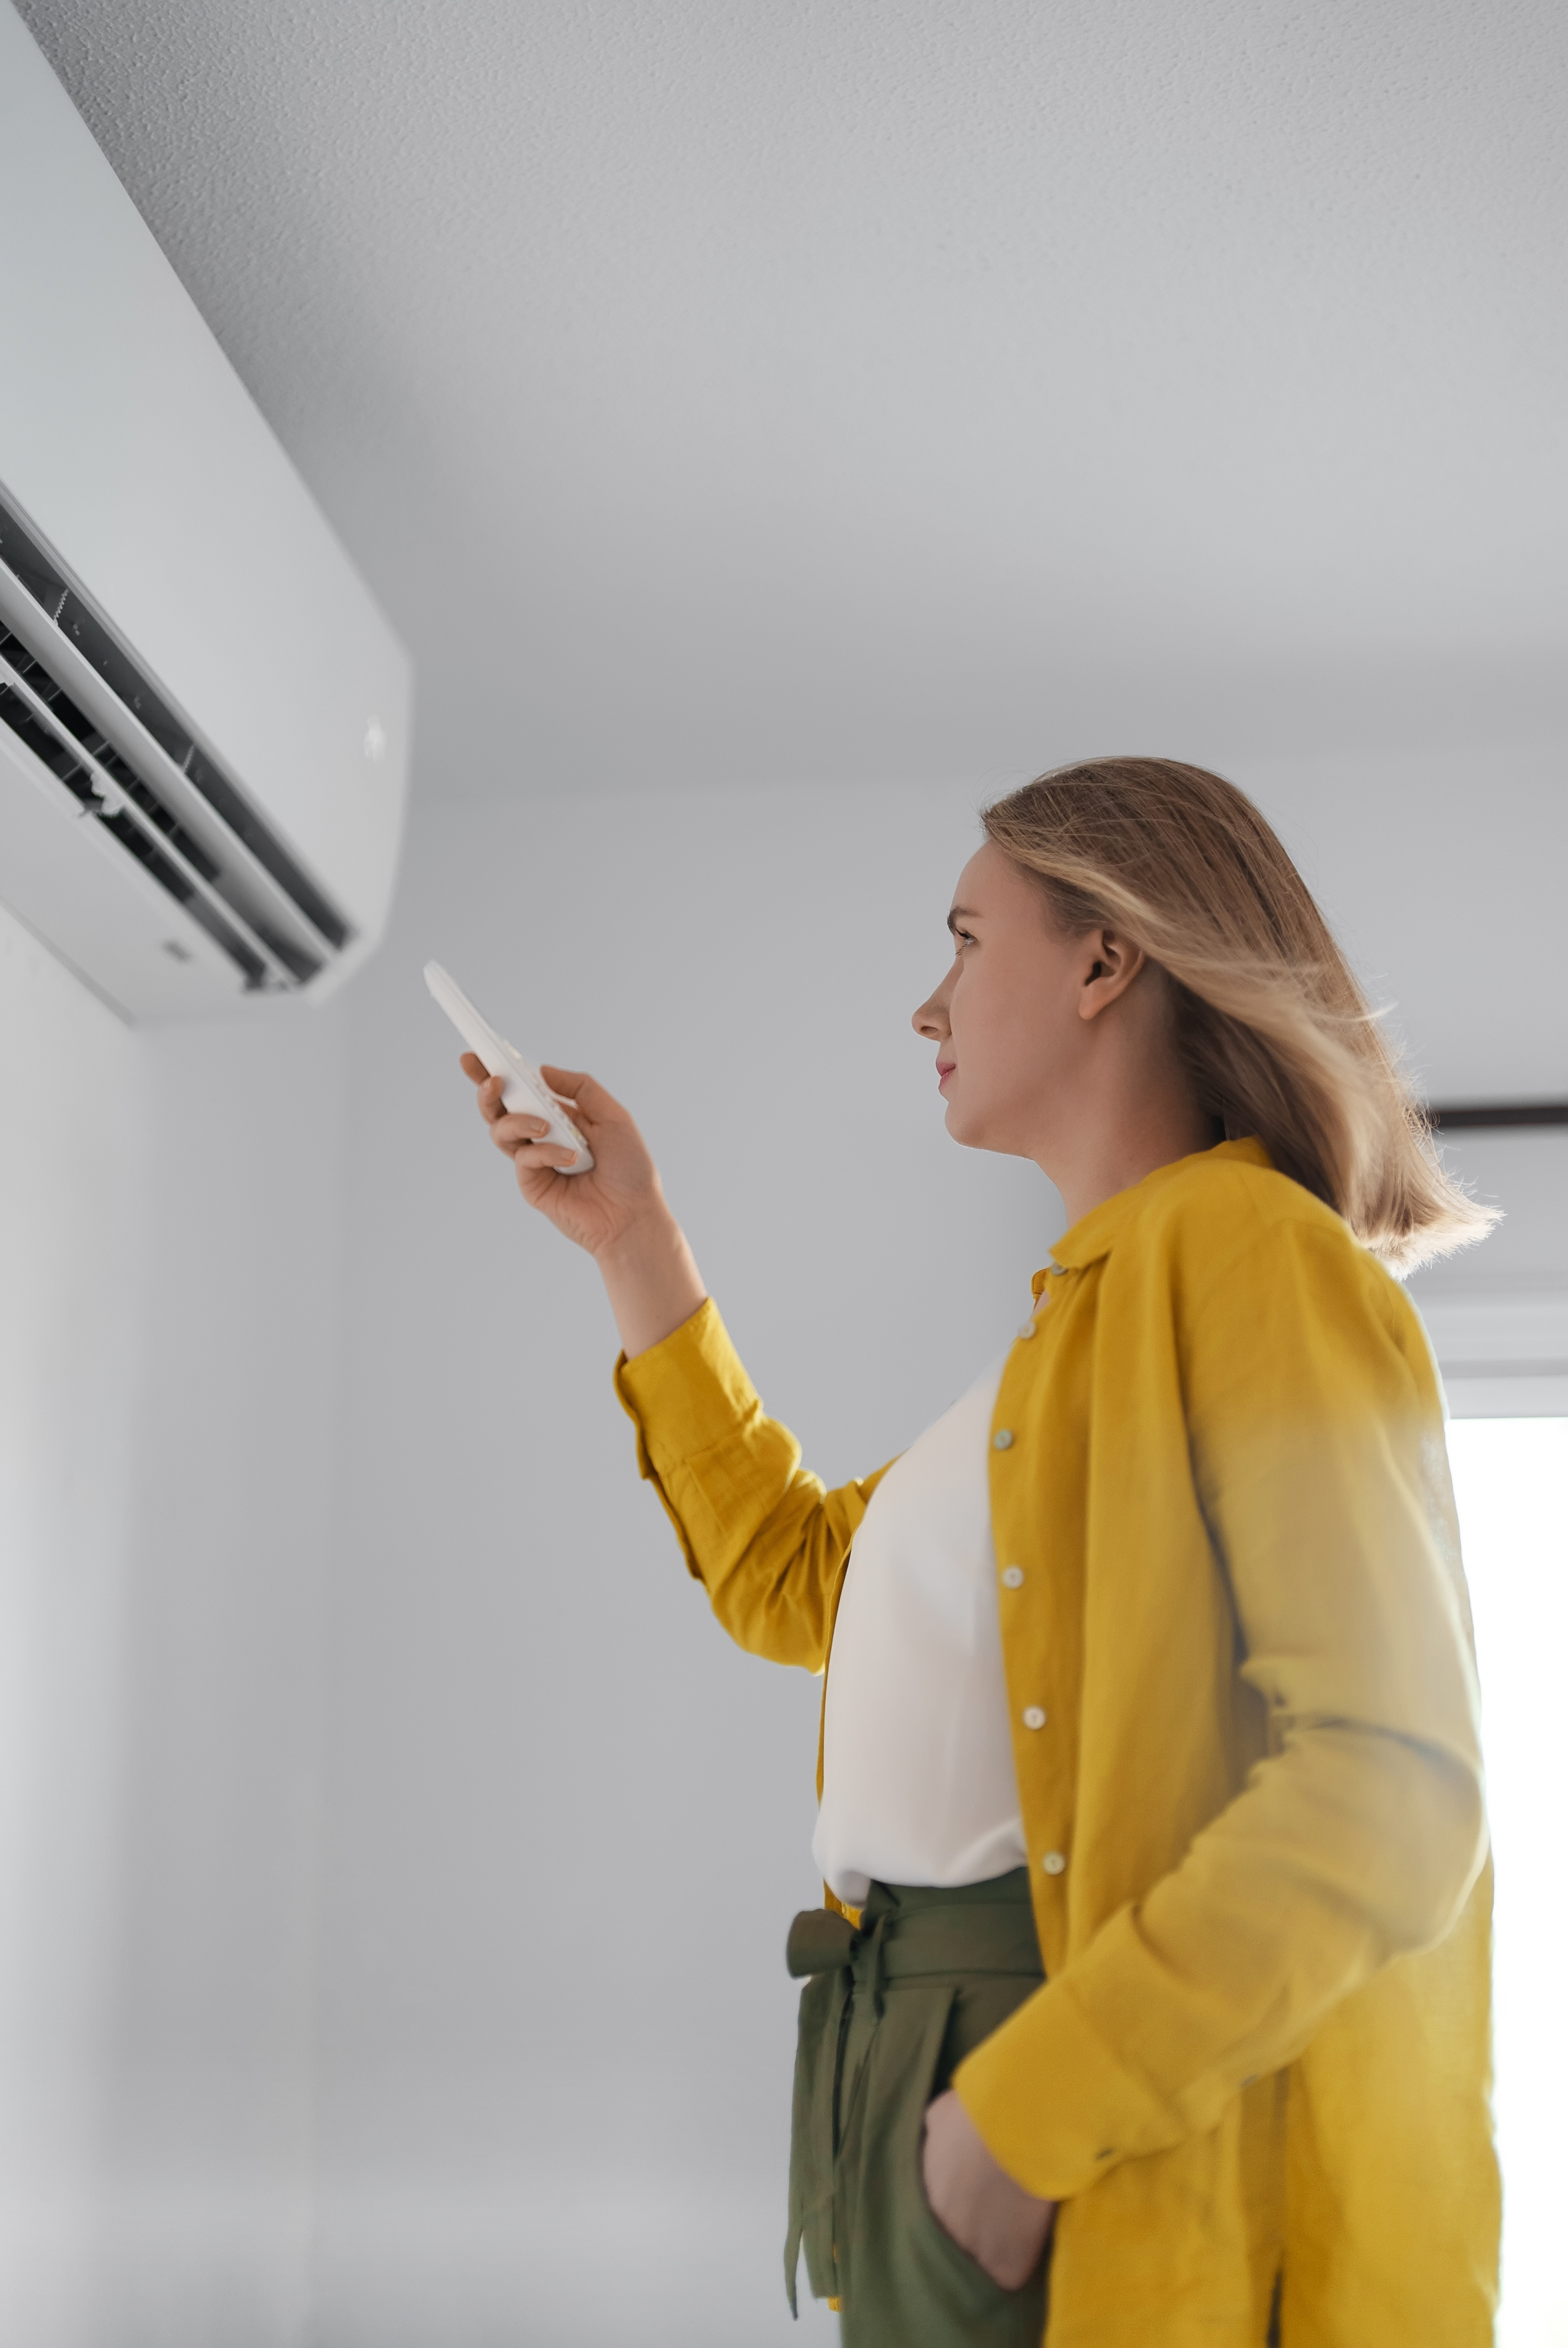 A homeowner struggling with common hvac problems - contact Ultimate Air Inc today!